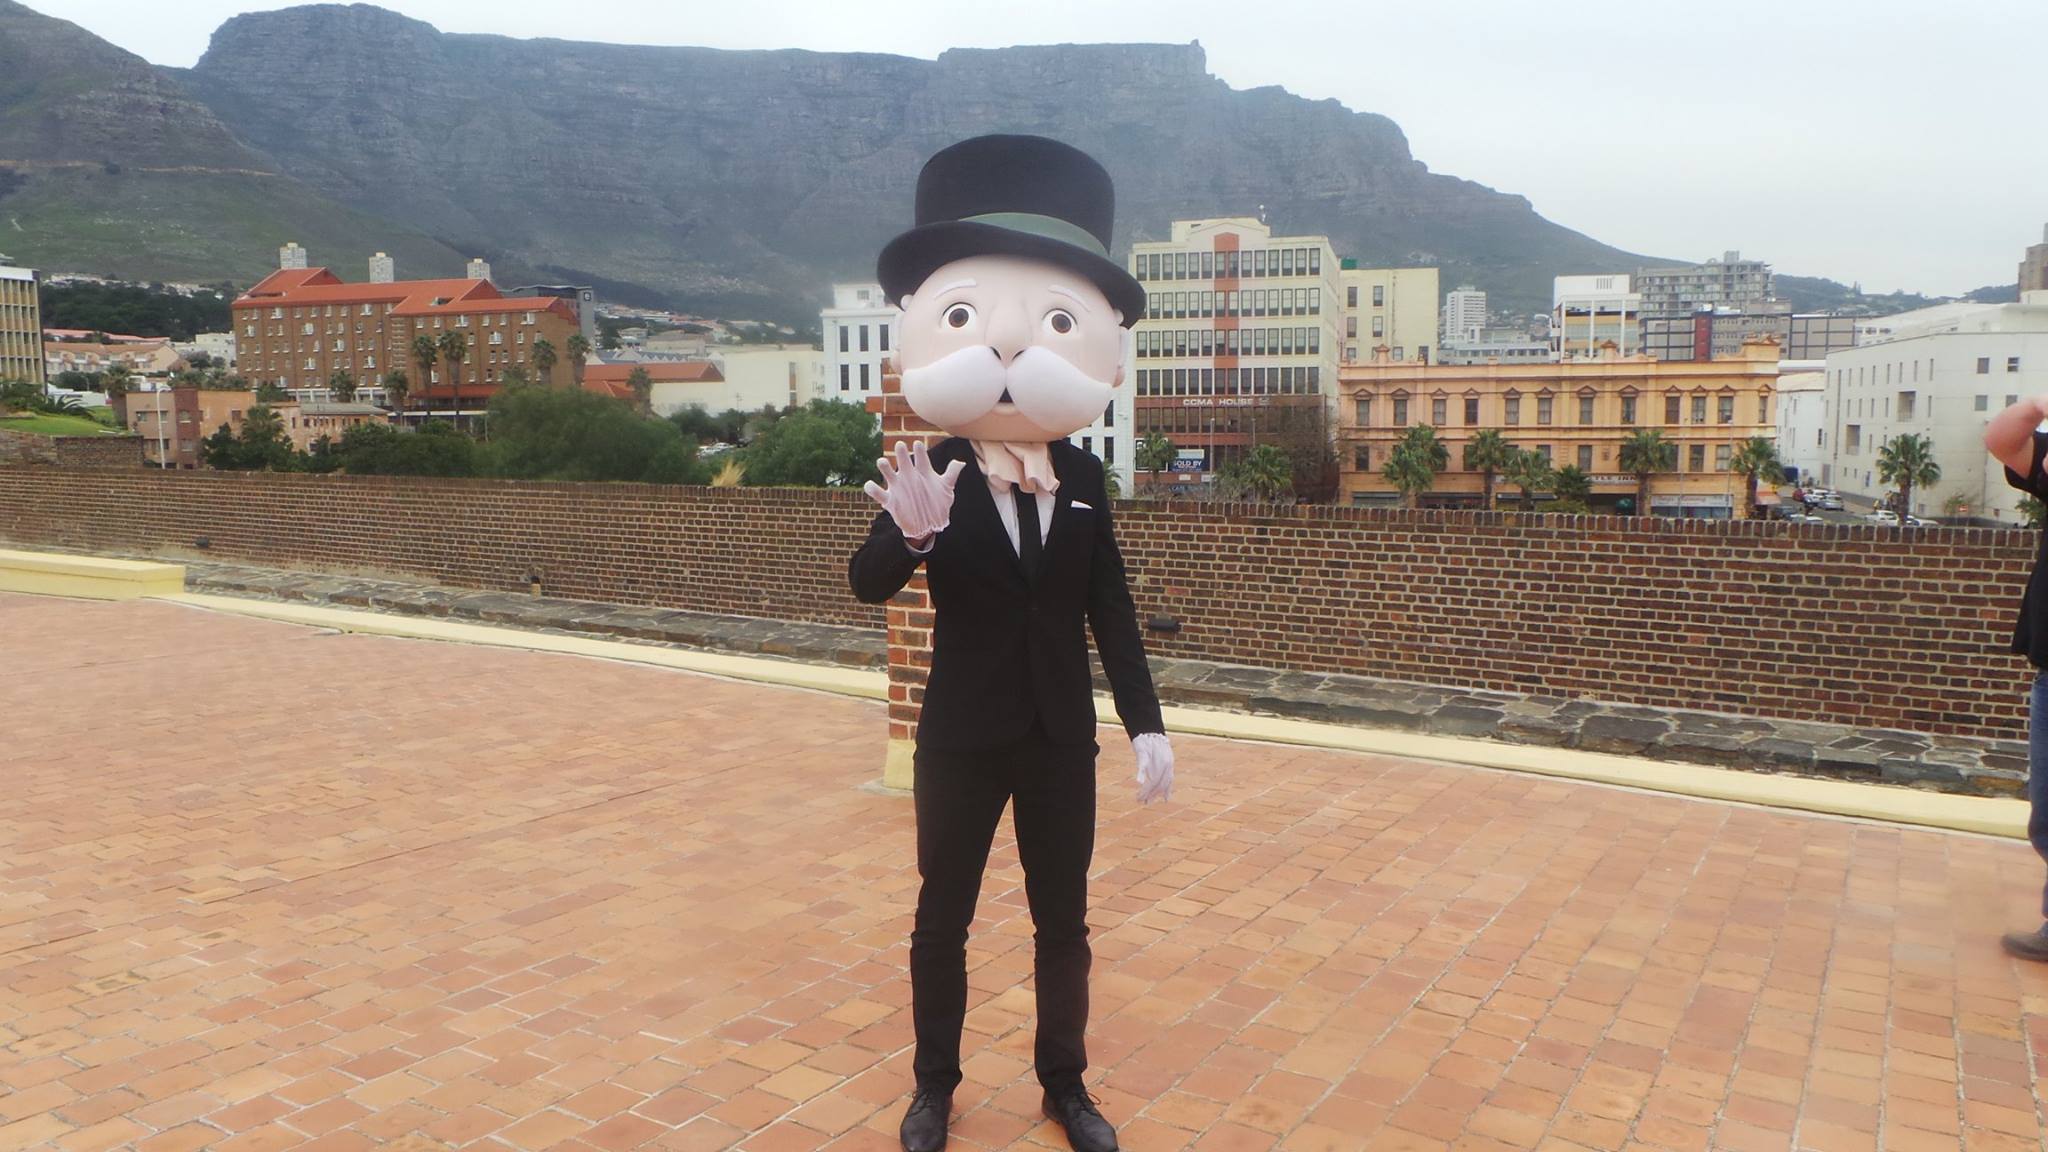 Mr. Monopoly in Cape Town. Source: Monopoly Cape Town Facebook page.